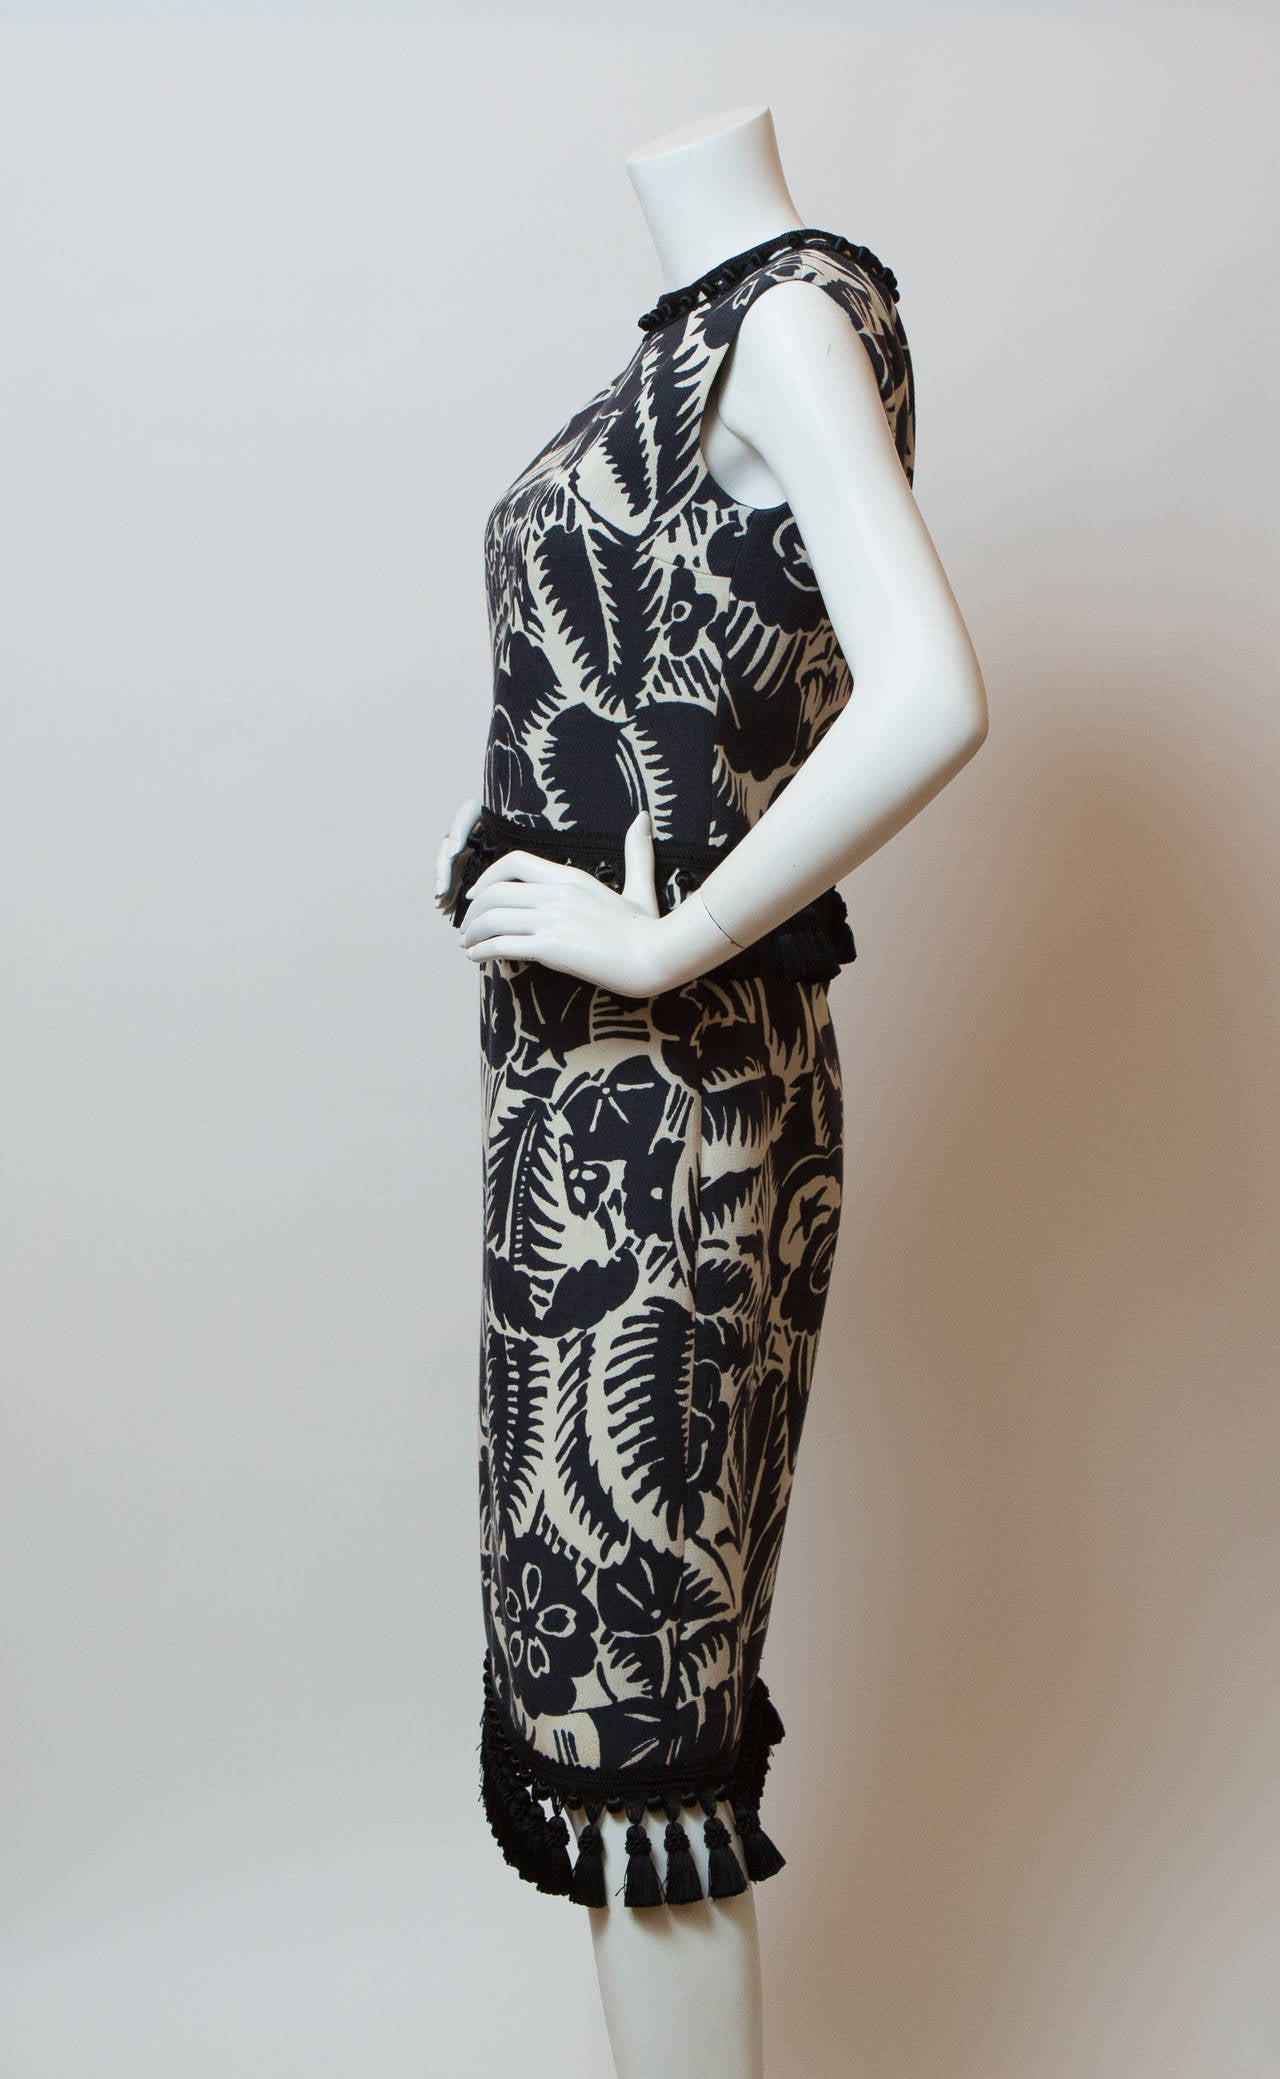 Marc Jacobs black and white floral print sleeveless dress with tassel detail.